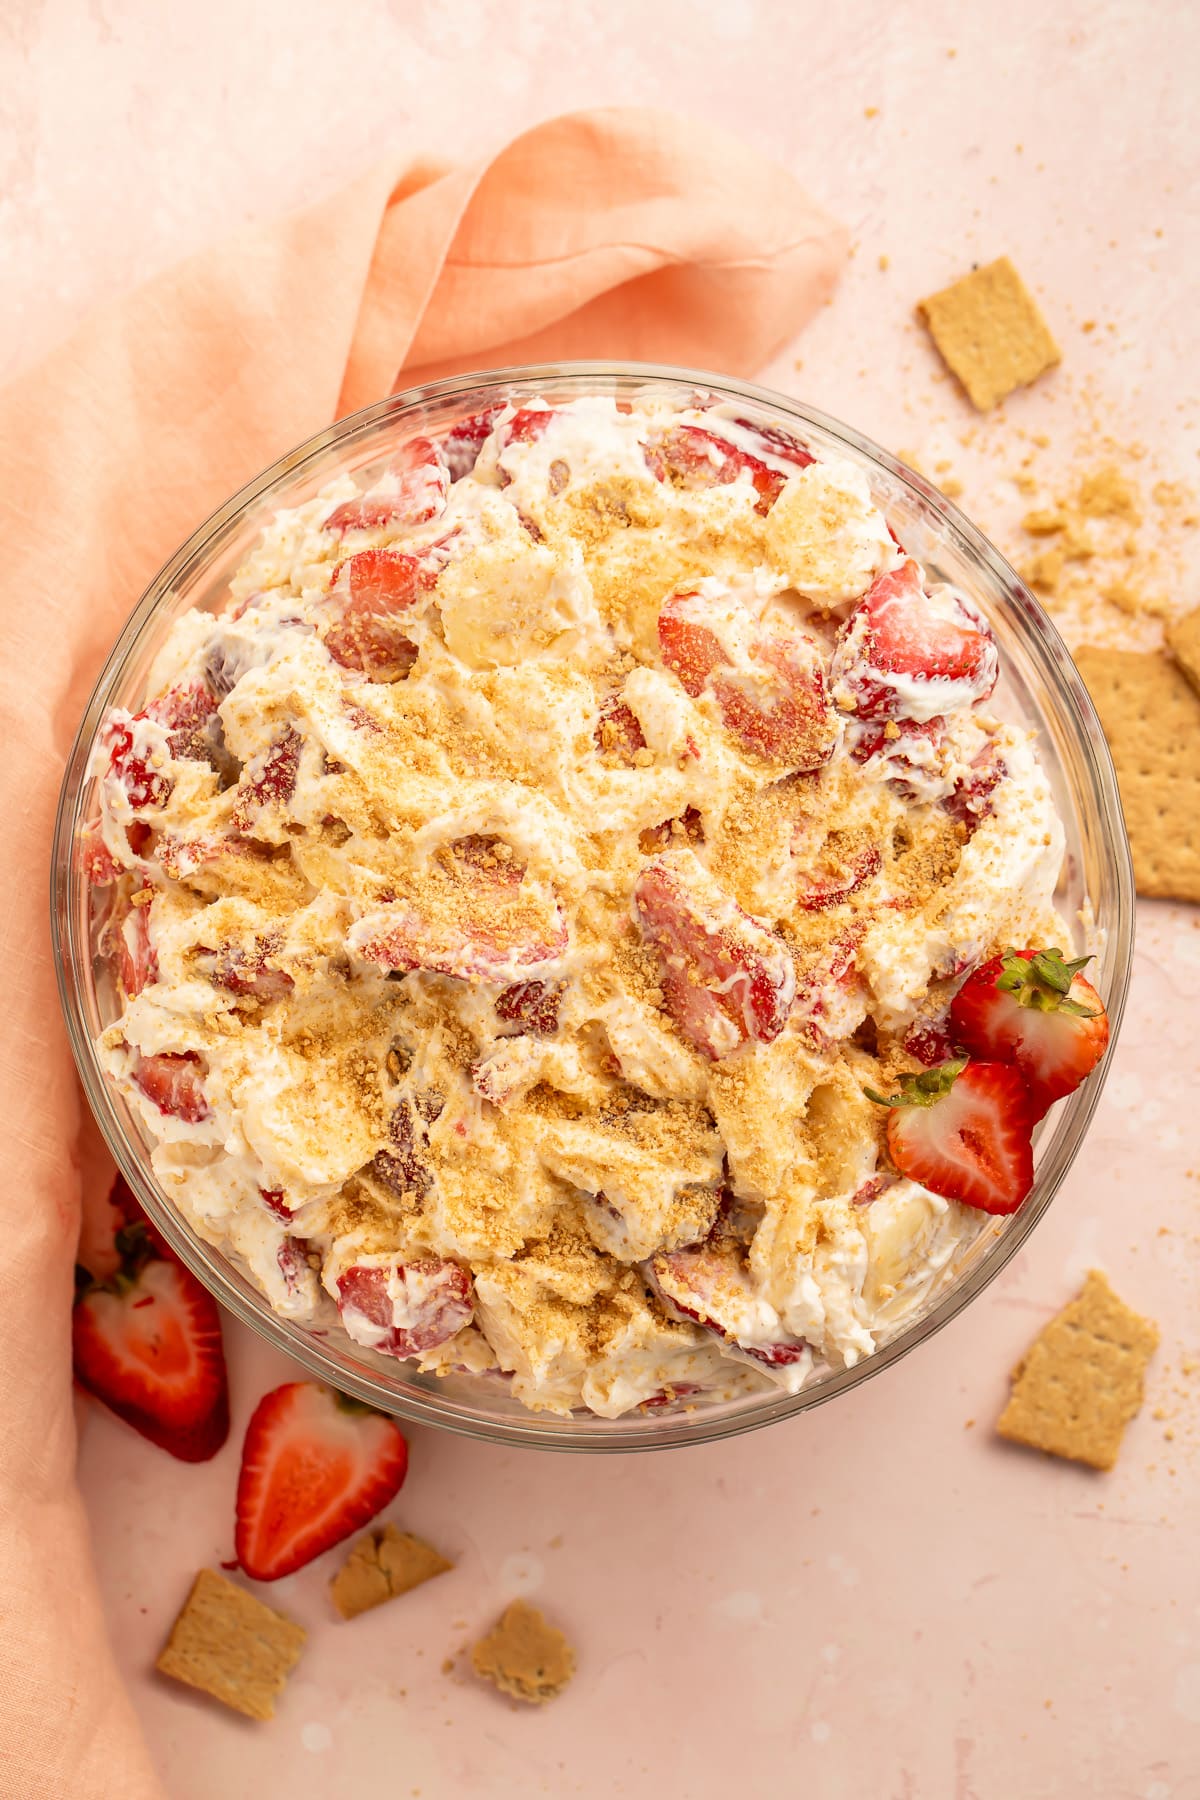 Top down view of a large bowl of creamy, thick strawberry cheesecake salad topped with crushed graham crackers on a pink tabletop with a pink cloth napkin.